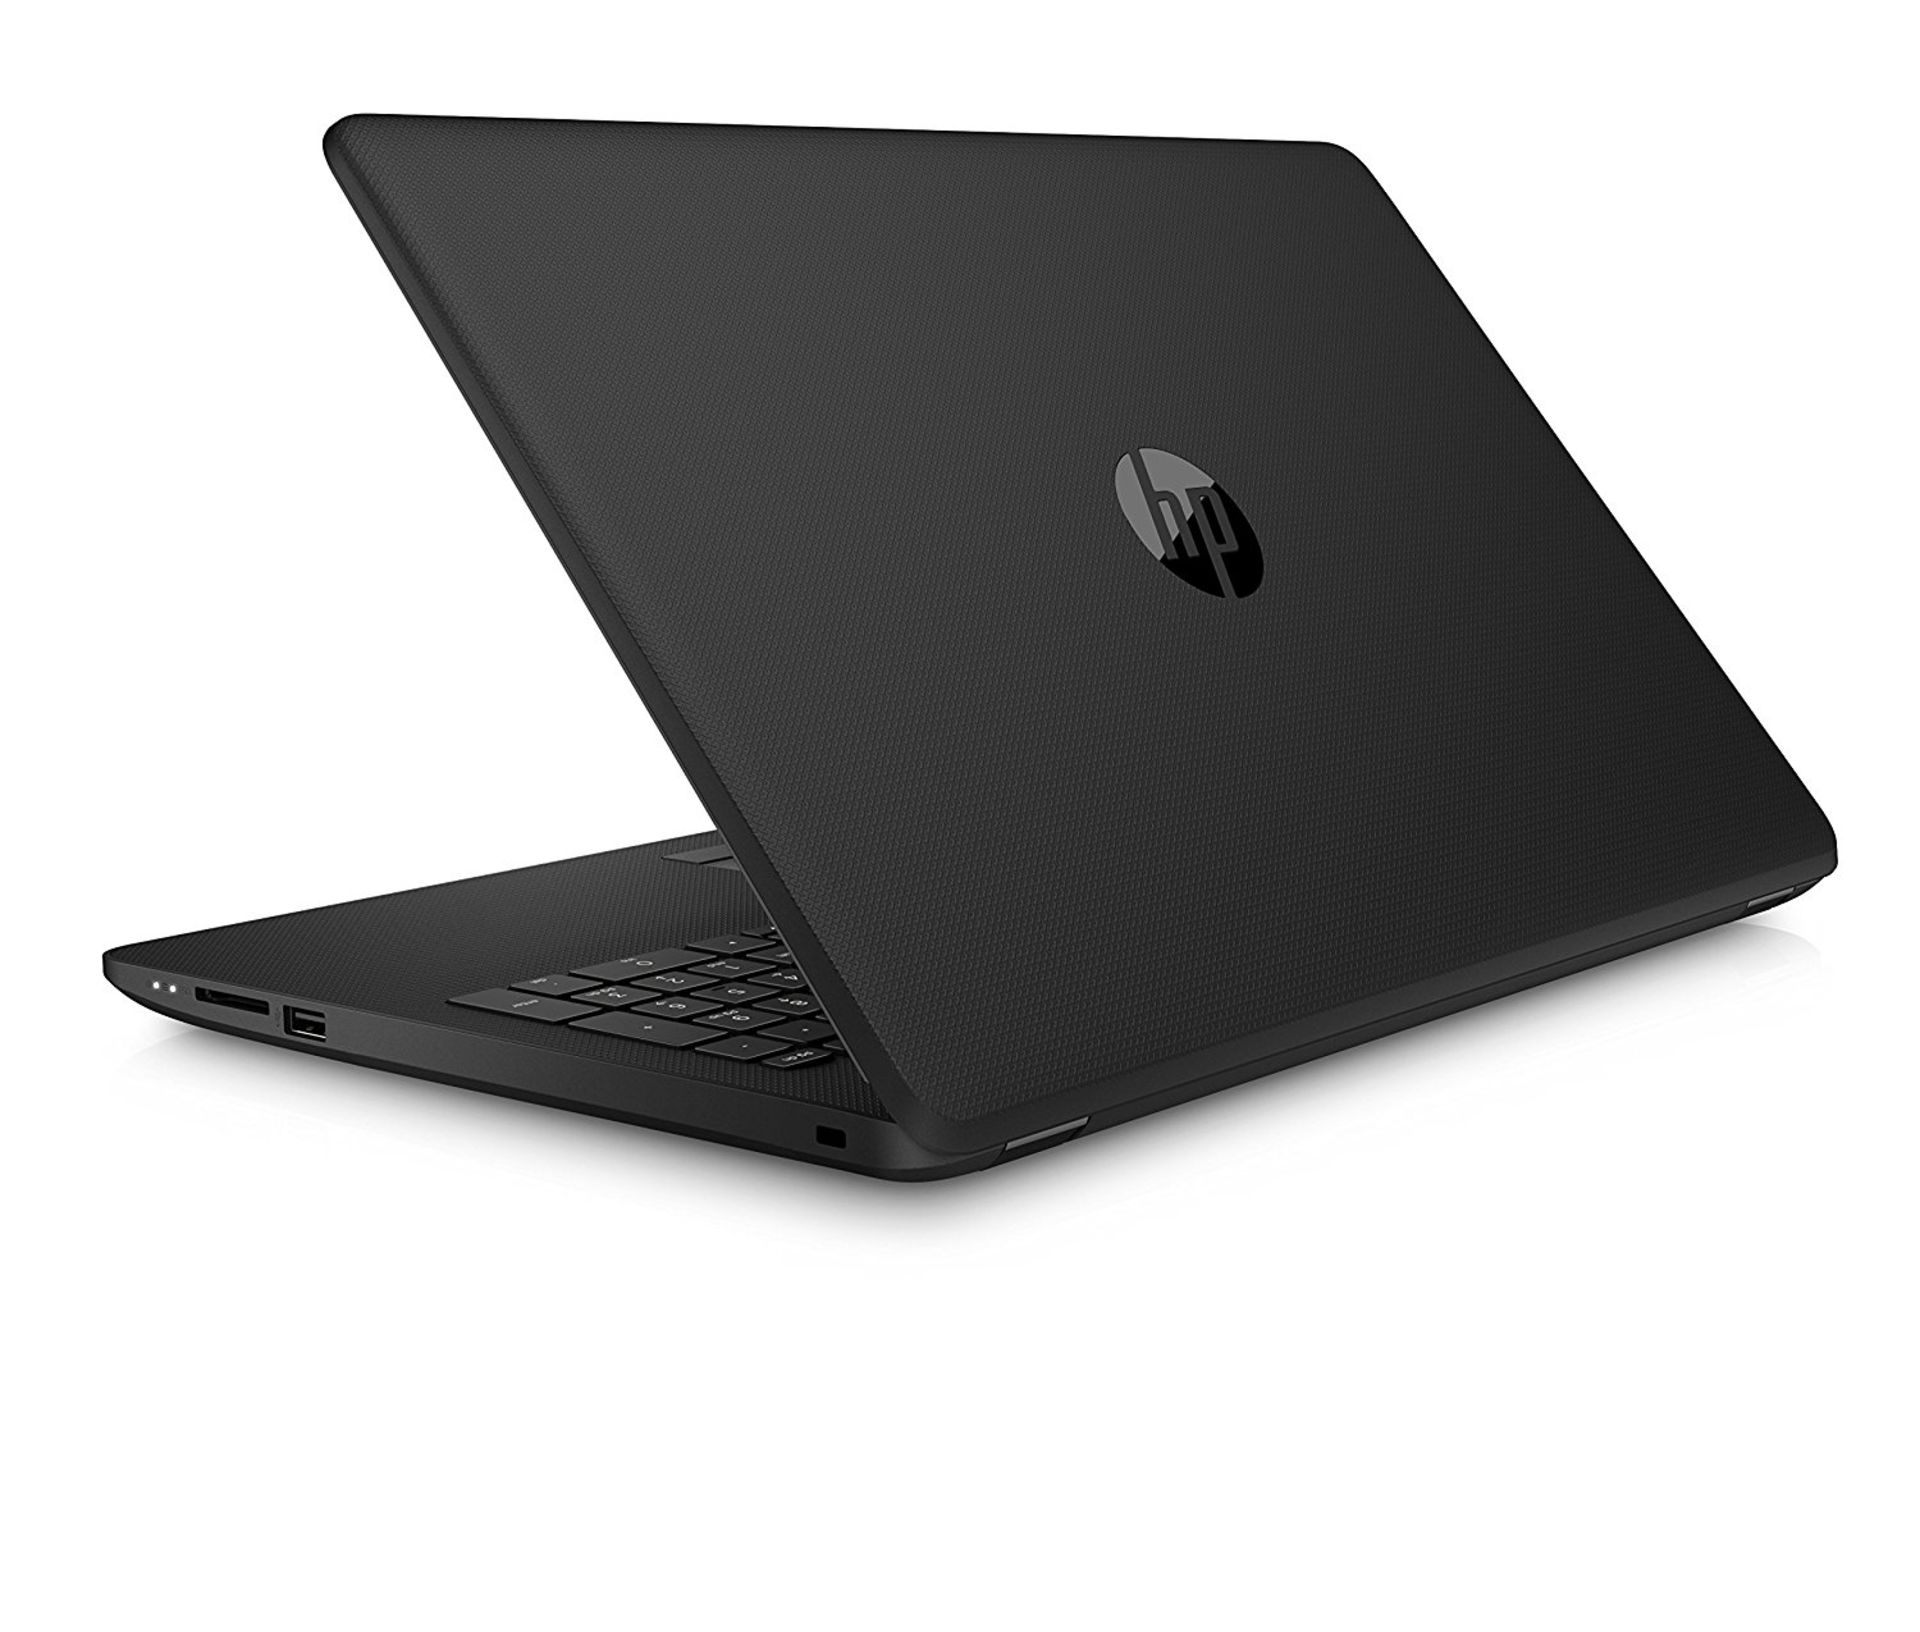 V Grade A HP 15.6" 15-BW505NA Laptop - AMD A4-9120 APU - 2.2Ghz - 4GB RAM - 1TB HDD - Windows 10 - - Image 4 of 4